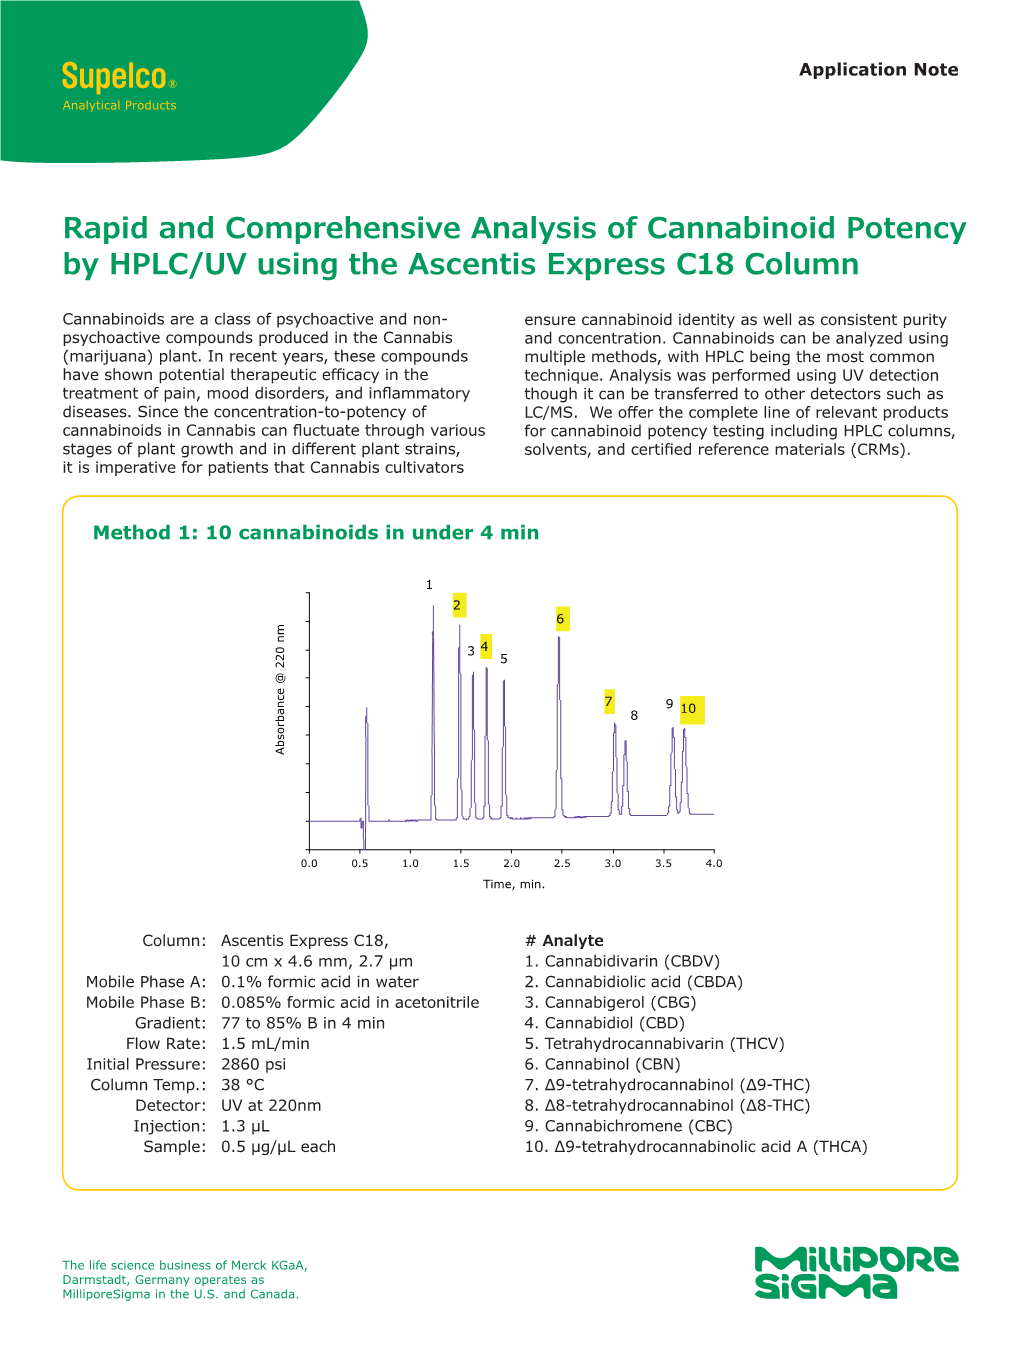 Rapid and Comprehensive Analysis of Cannabinoid Potency by HPLC/UV Using the Ascentis Express C18 Column